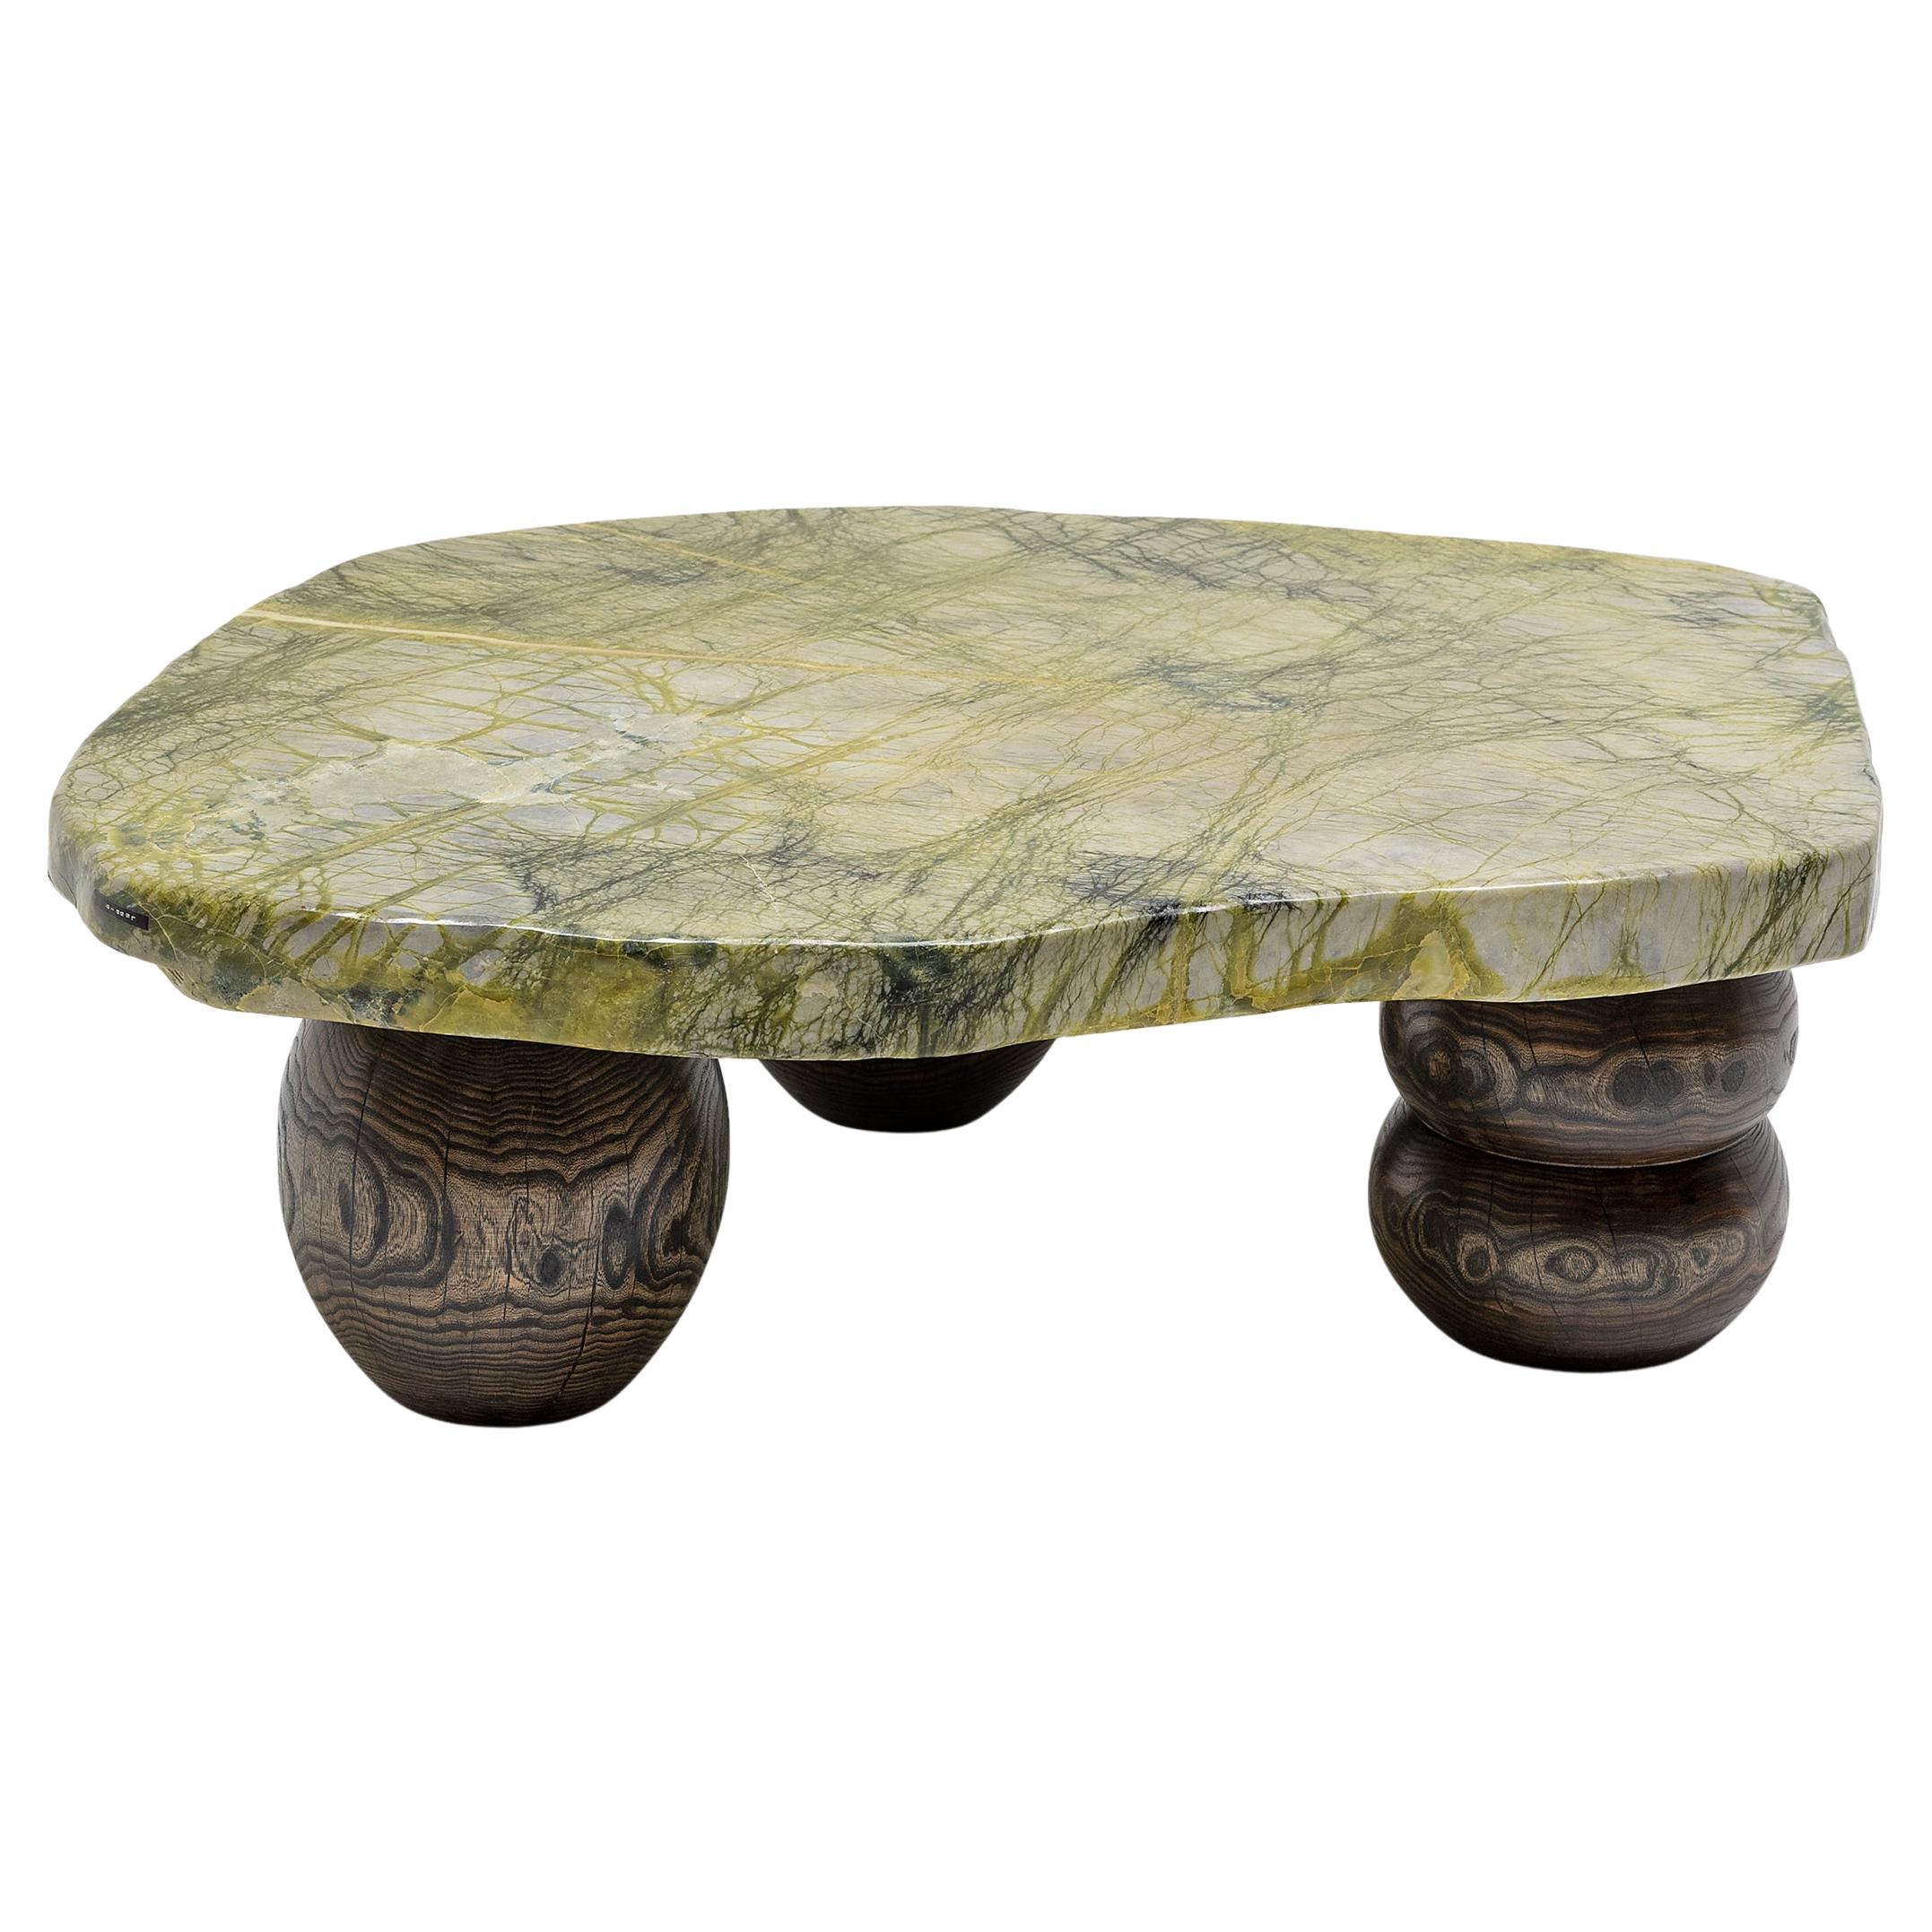 Chinese Double Gourd Meditation Stone Table